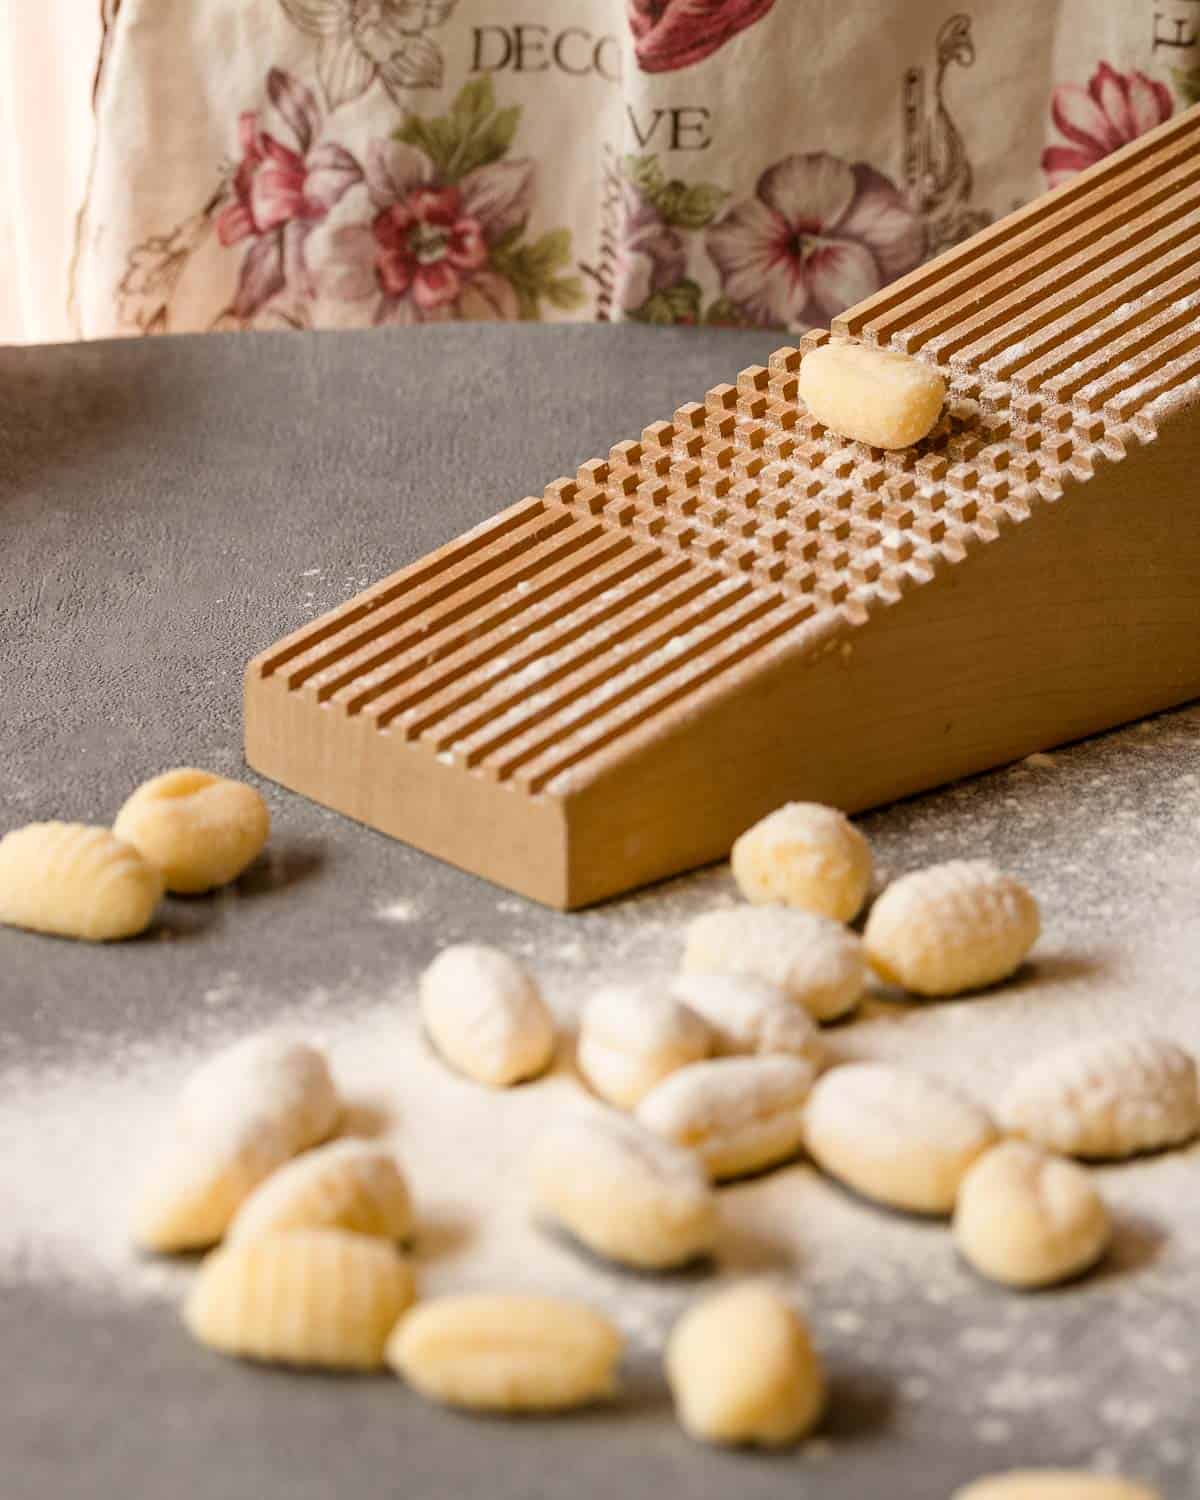 gnocchi on a grater and few gnocchi already rolled in front